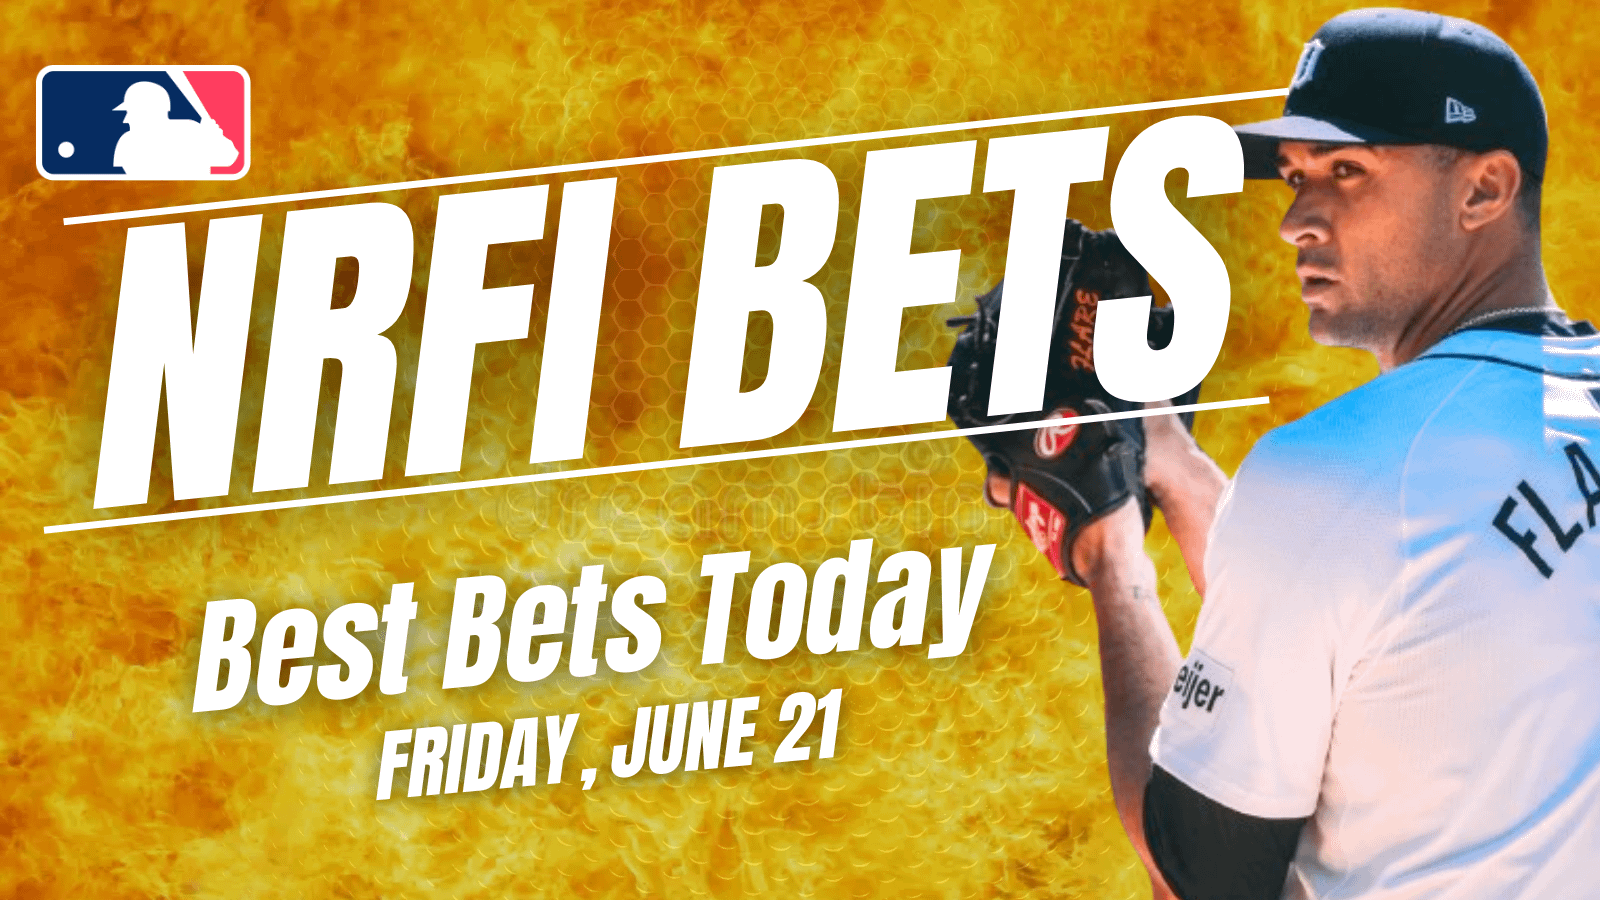 Get the best NRFI bets for today: Here are the top no run first inning picks, predictions and prop bets for Friday, June 21 ...